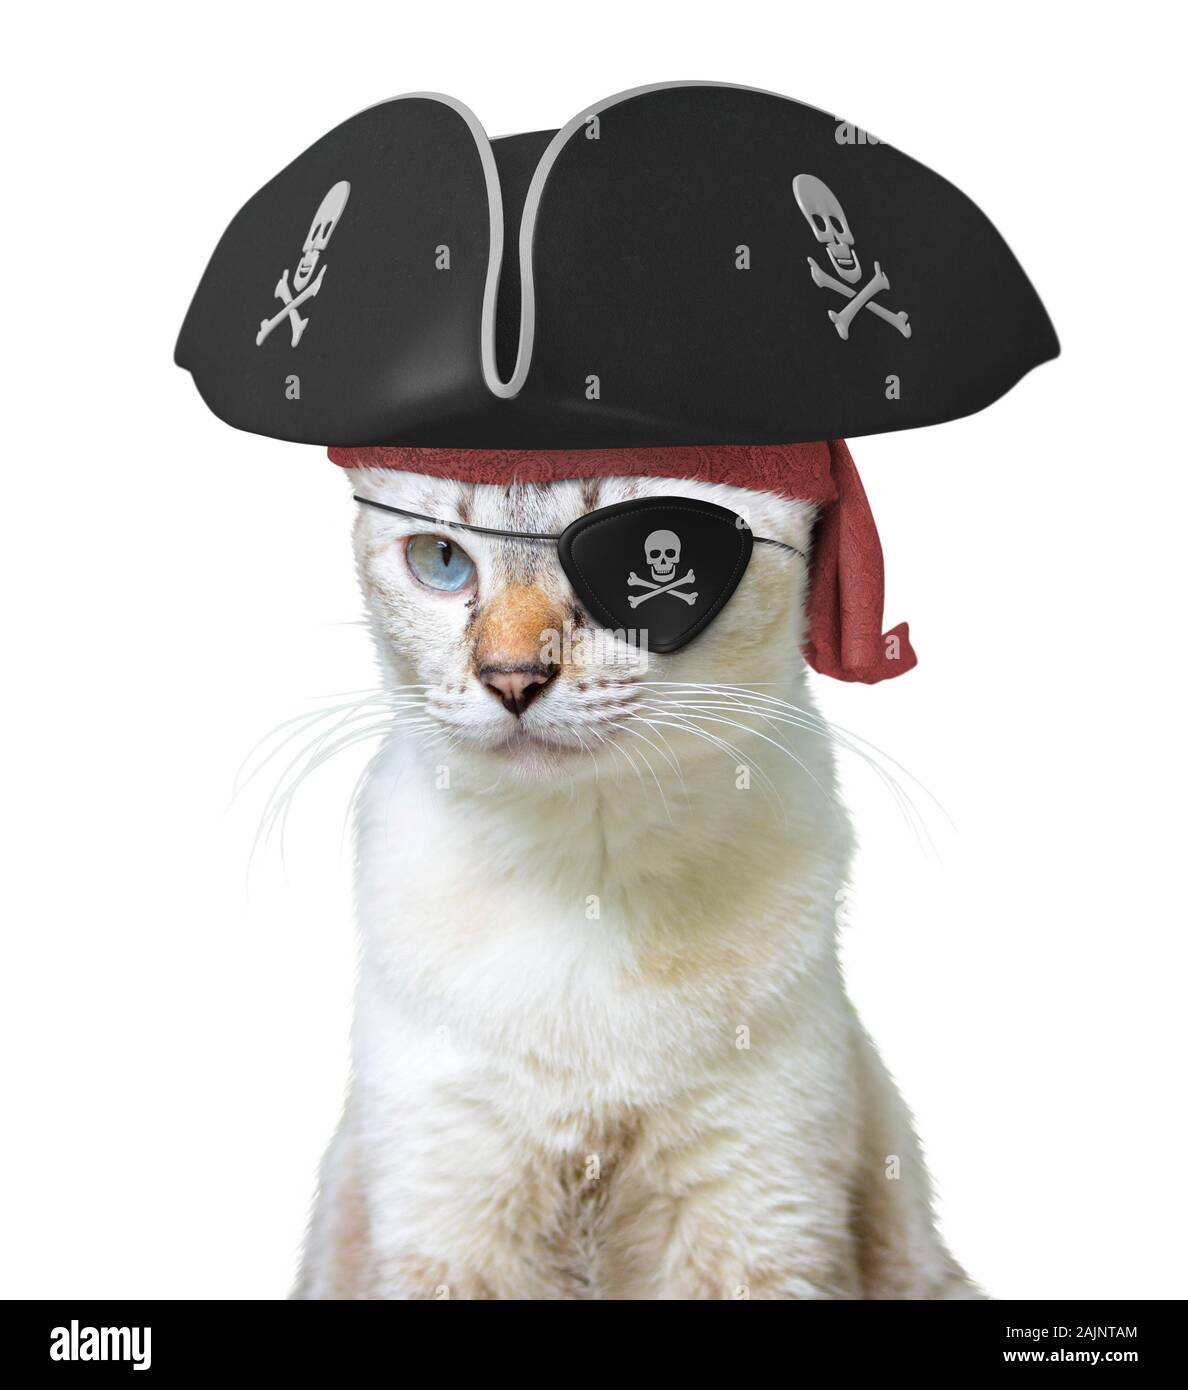 Funny animal costume of a cat pirate captain wearing a tricorn hat and eyepatch with skulls and crossbones, isolated on a white background Stock Photo